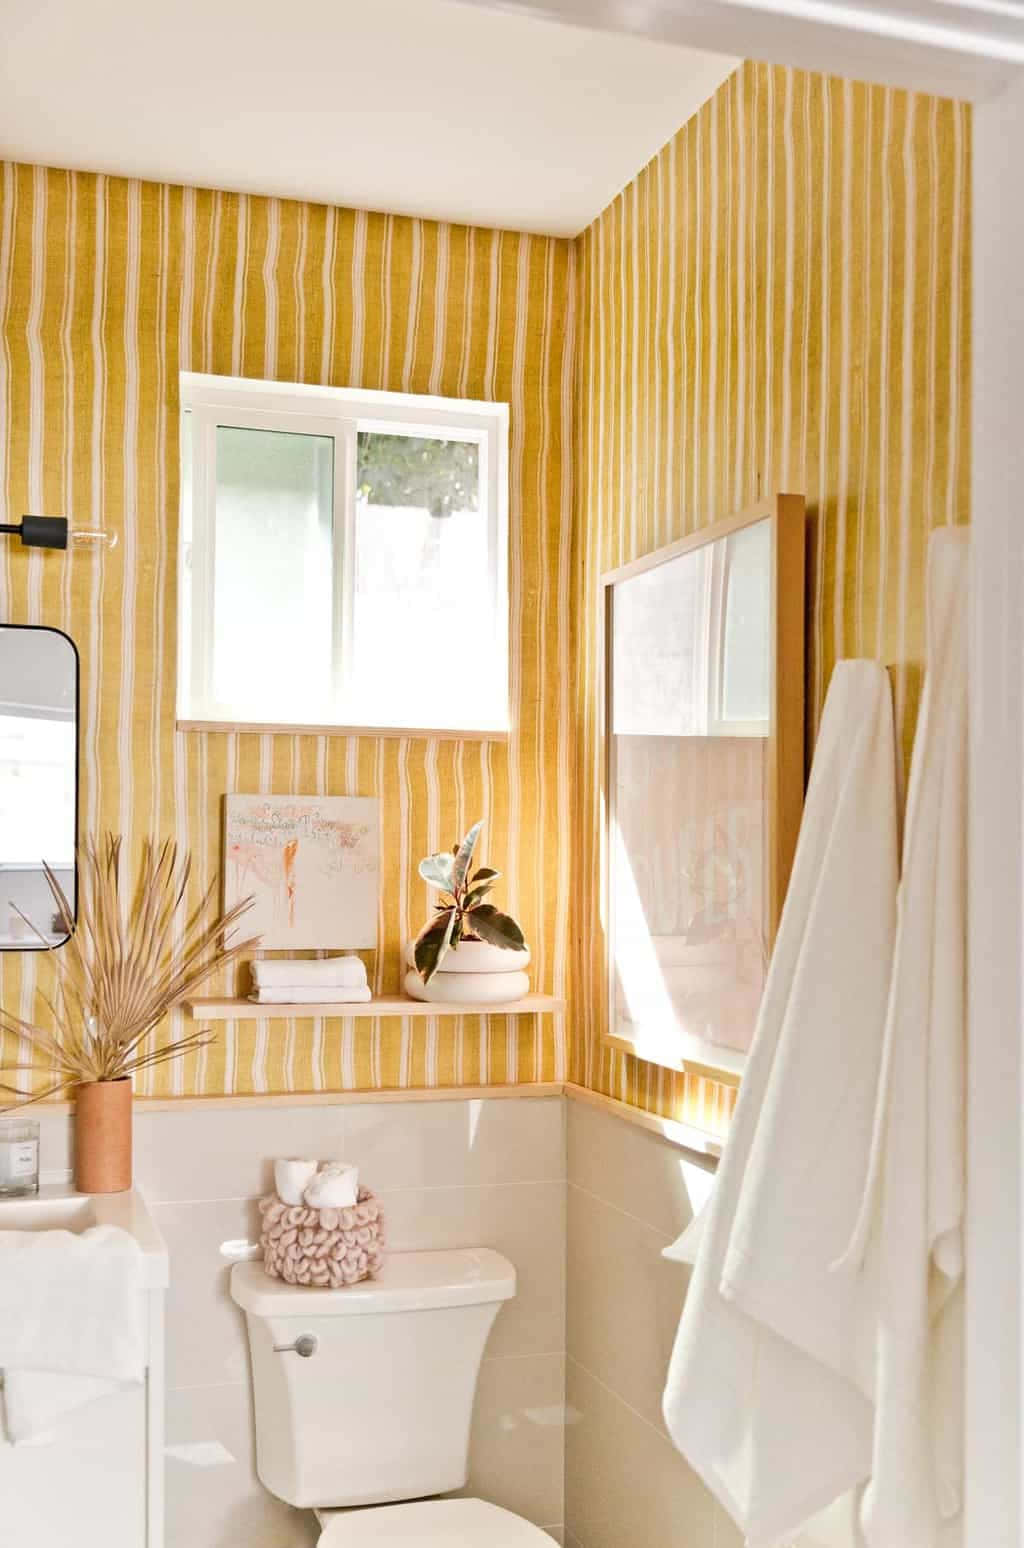 Bathroom Yellow Stripe Patterned Walls Background